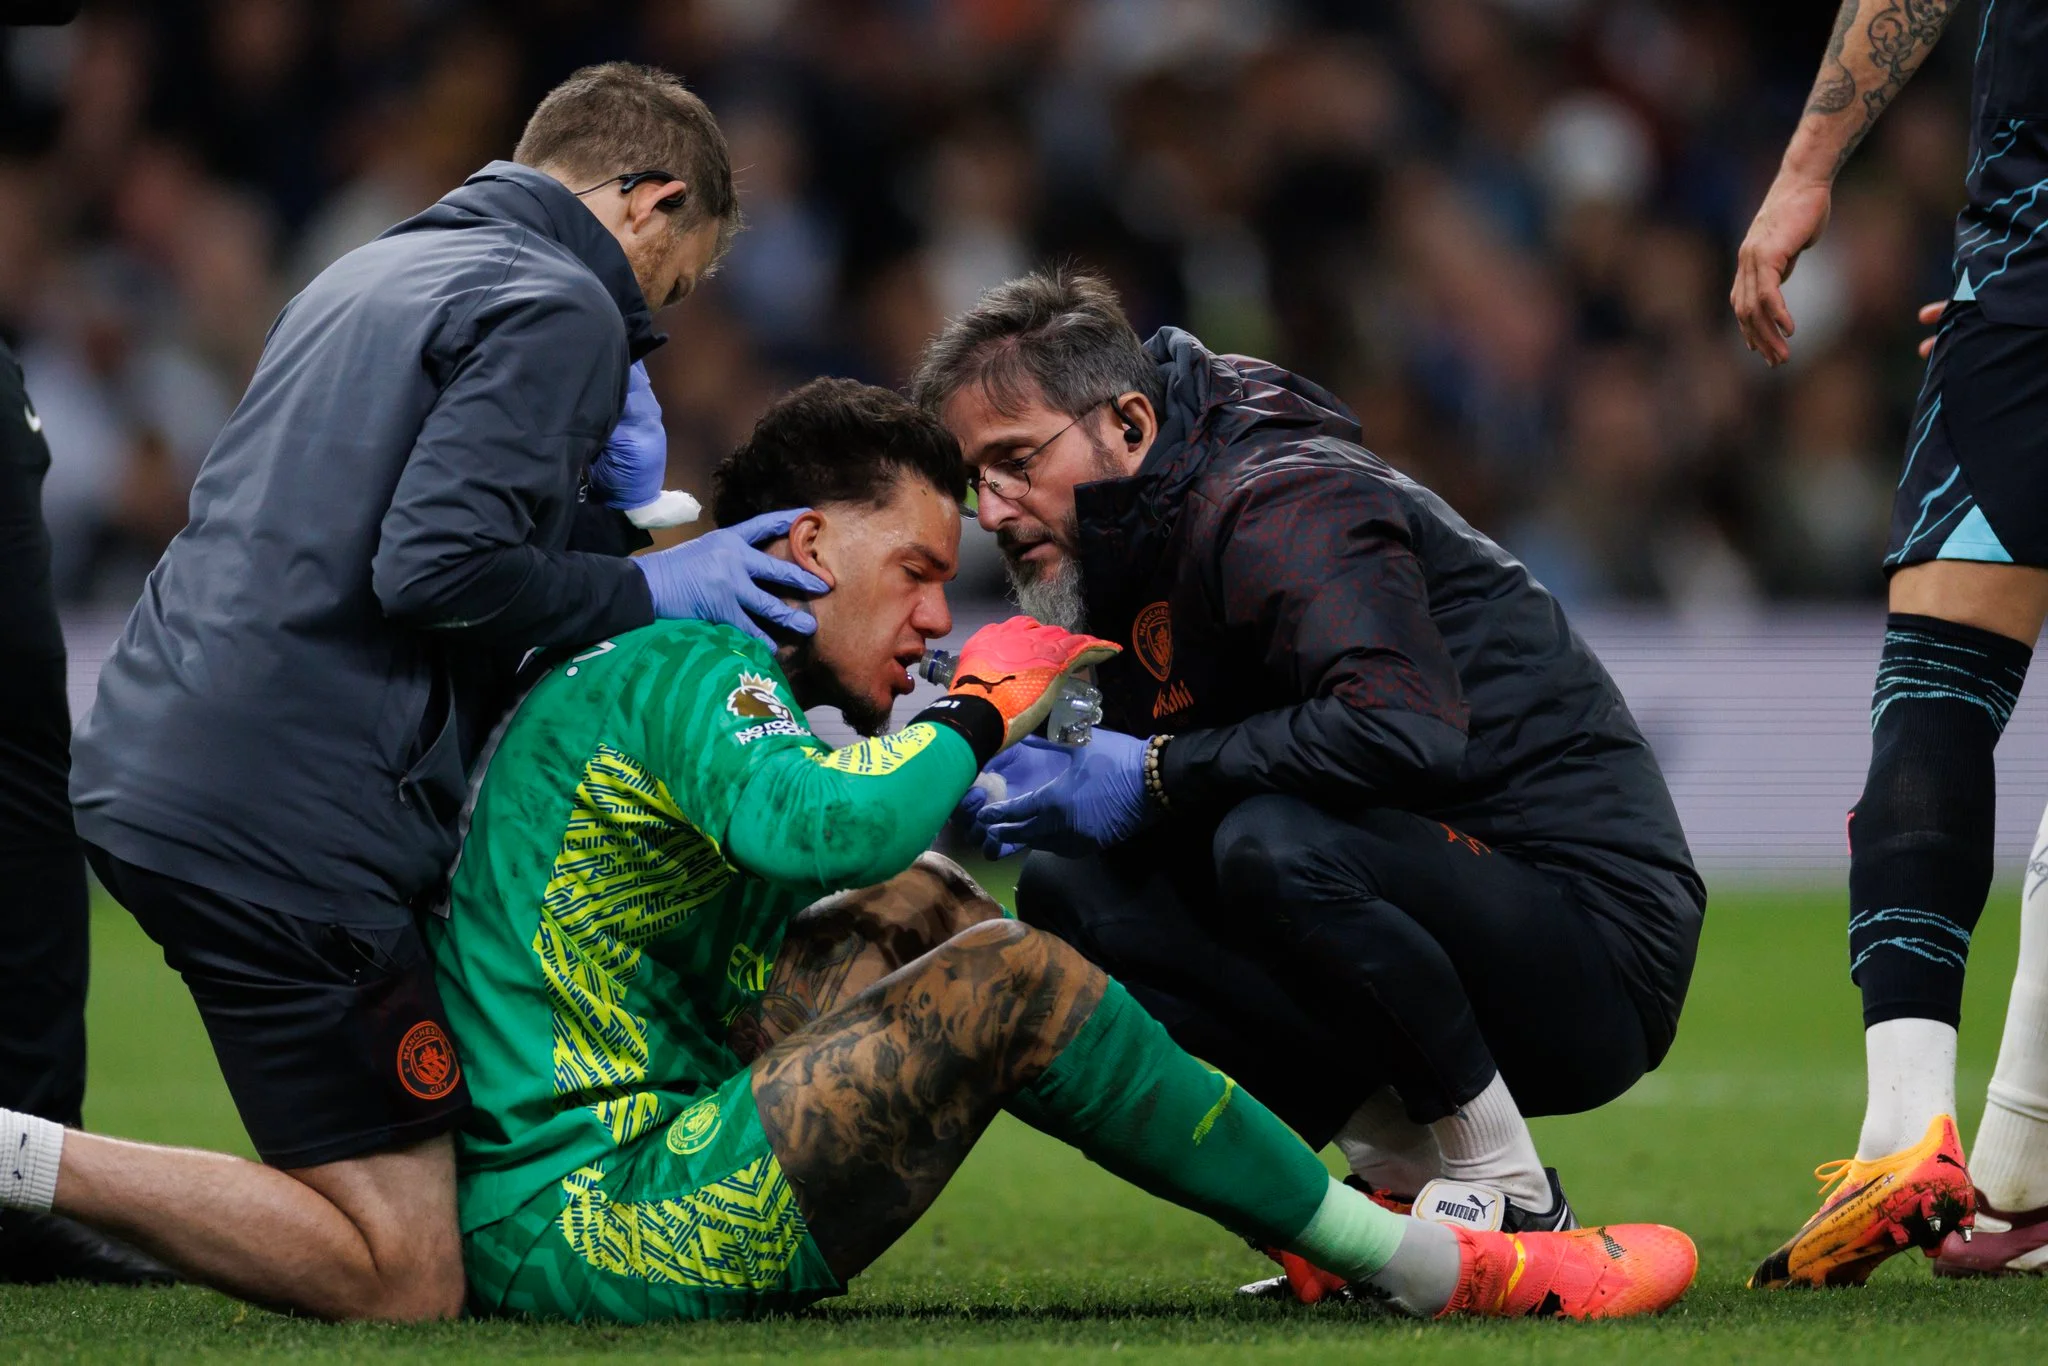 Ederson Injury: Manchester City confirm star player is out injured for the season